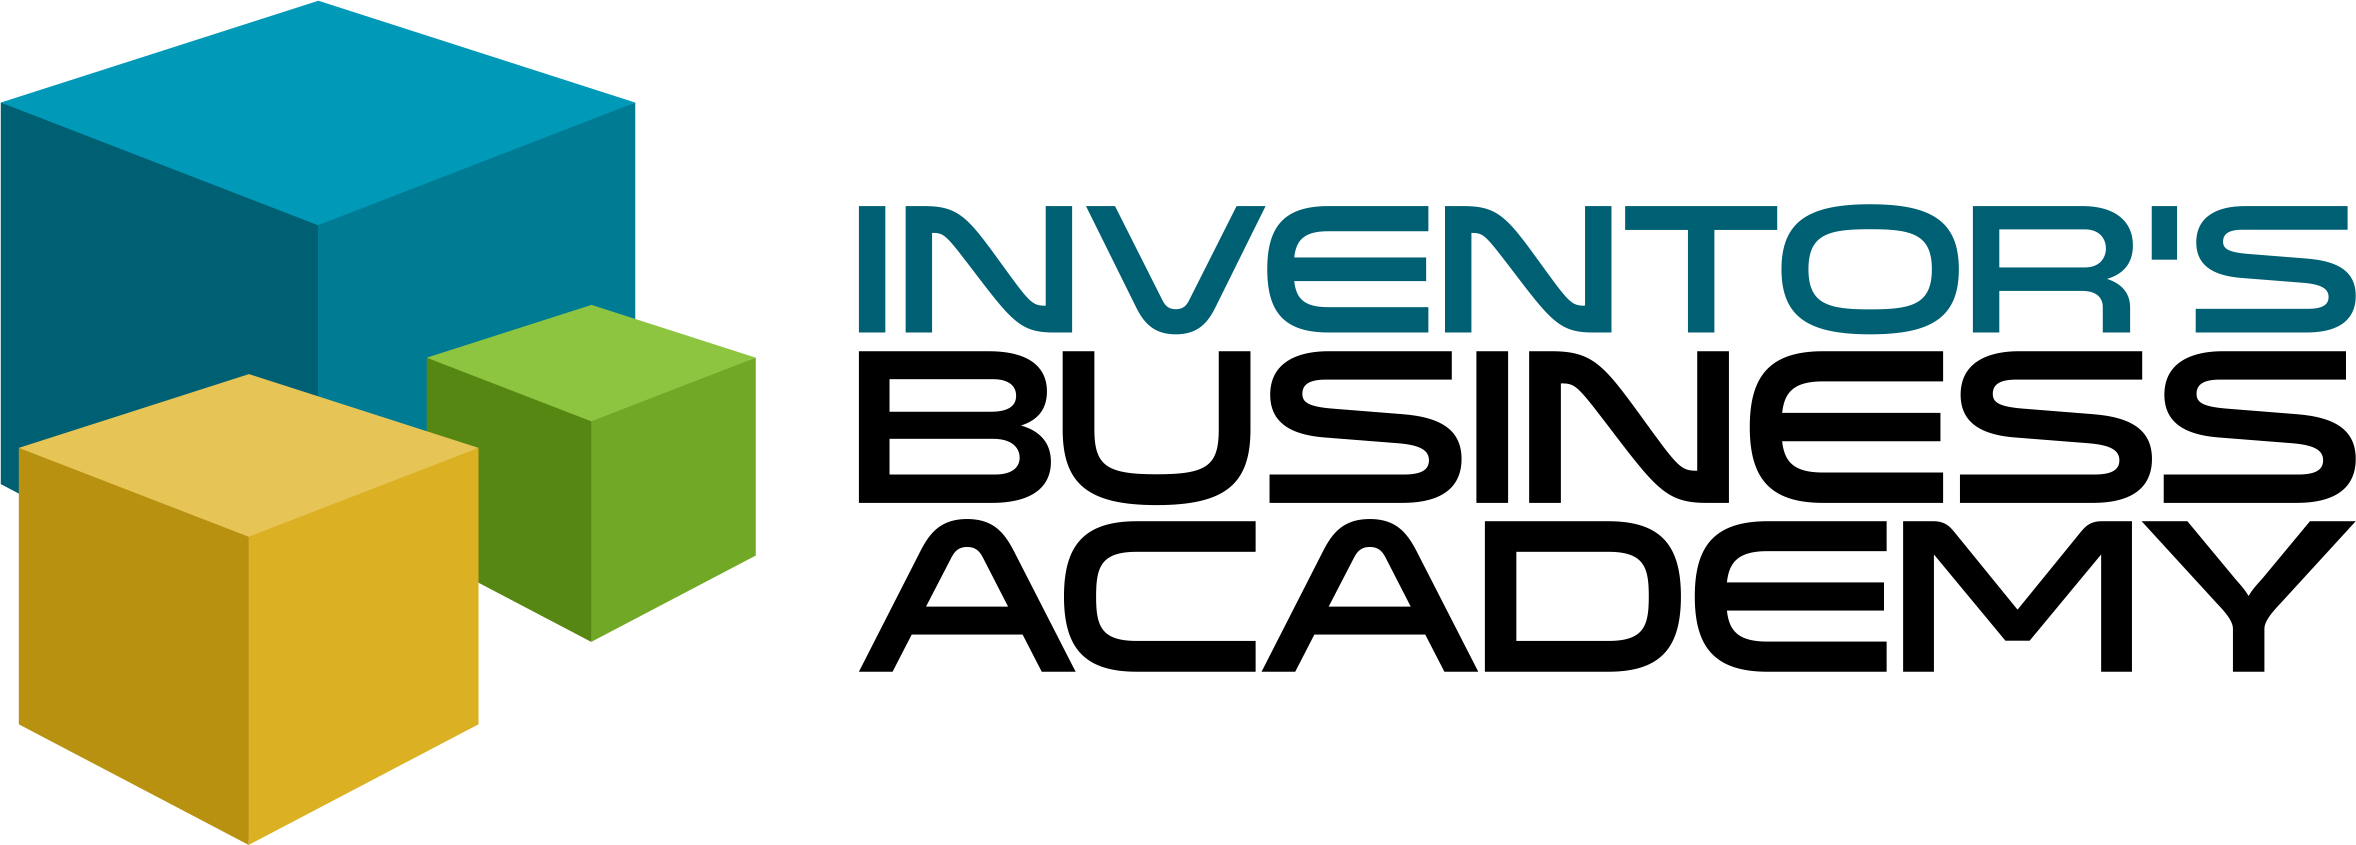 The Inventor's Business Academy